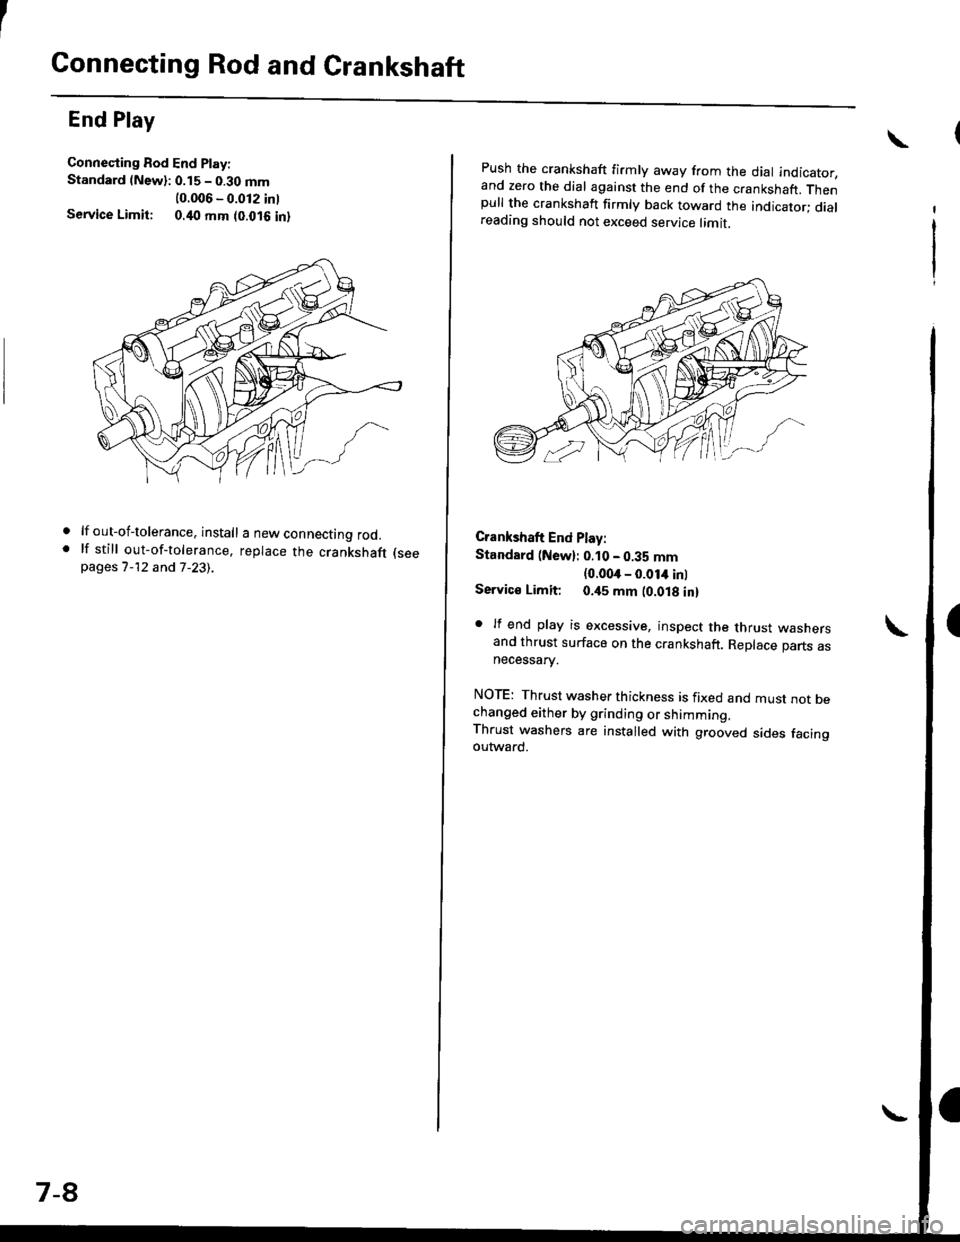 HONDA CIVIC 1997 6.G Workshop Manual Connecting Rod and Crankshaft
End Play
Connecling Bod End Play:
Standard (Newl: 0.15 - 0.30 mm
10.006 - 0.012 inlService Limit: 0.40 mm (0.016 inl
lf out-of-tolerance. install a new connecting rod.lf 